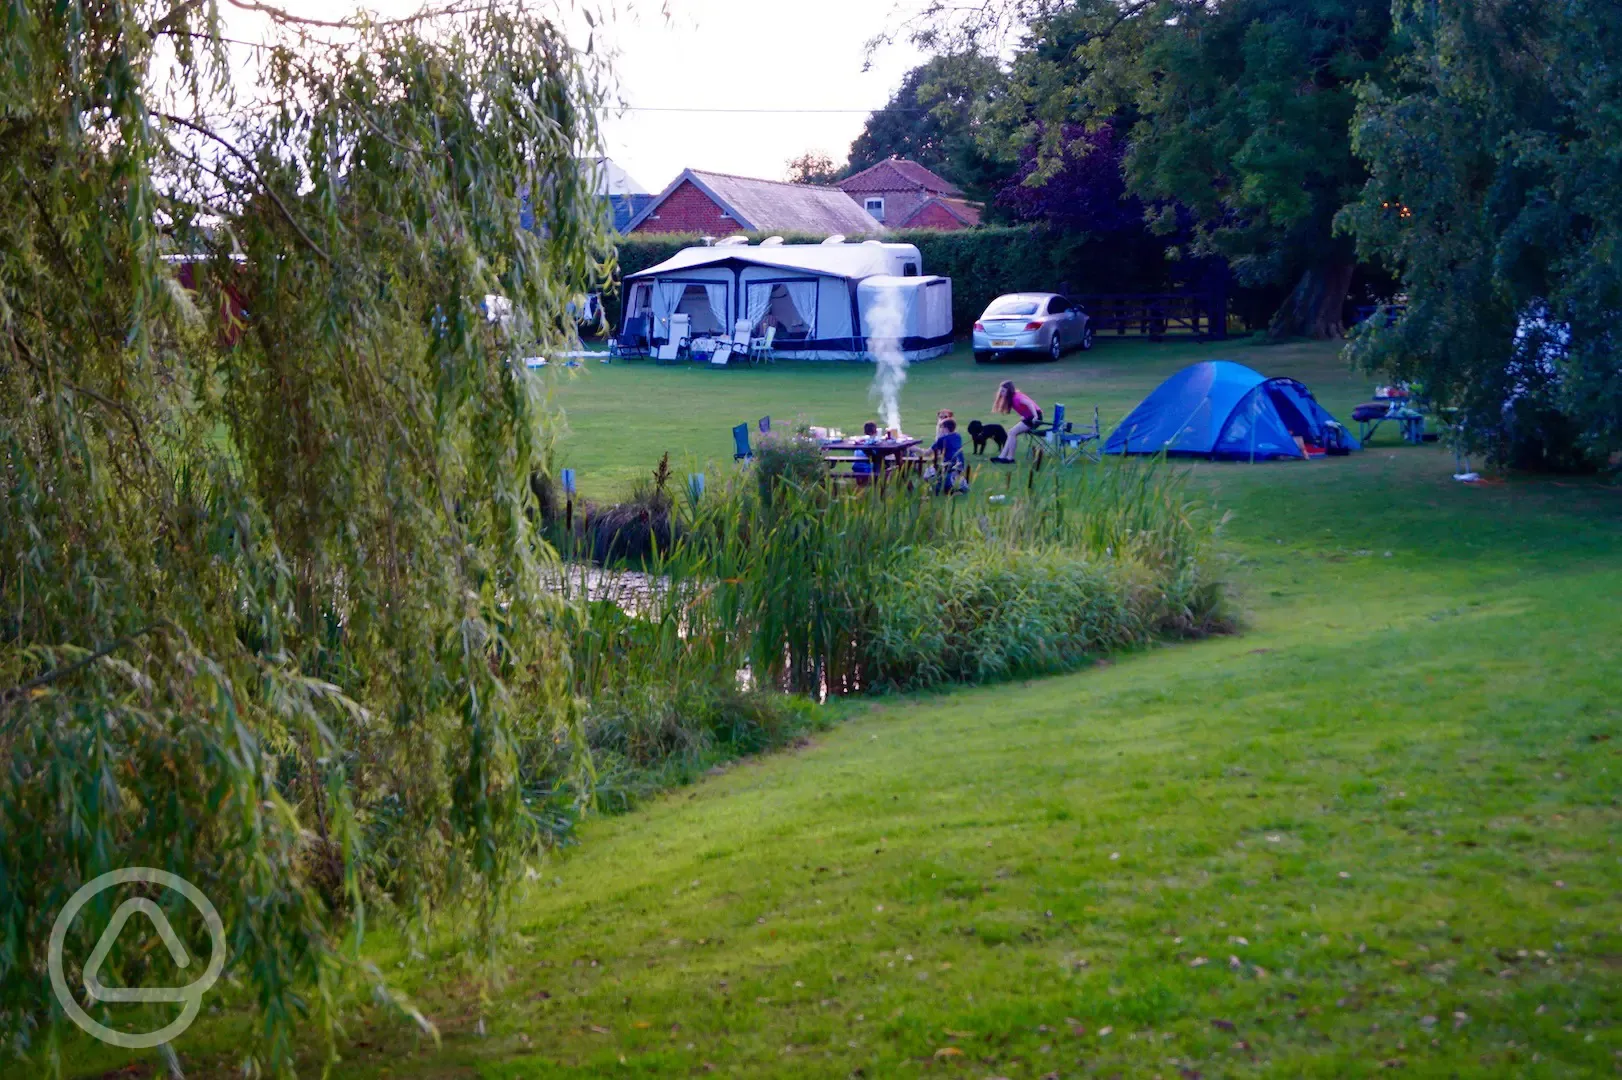 View from behind Pond to Camping Pitch in front of gate